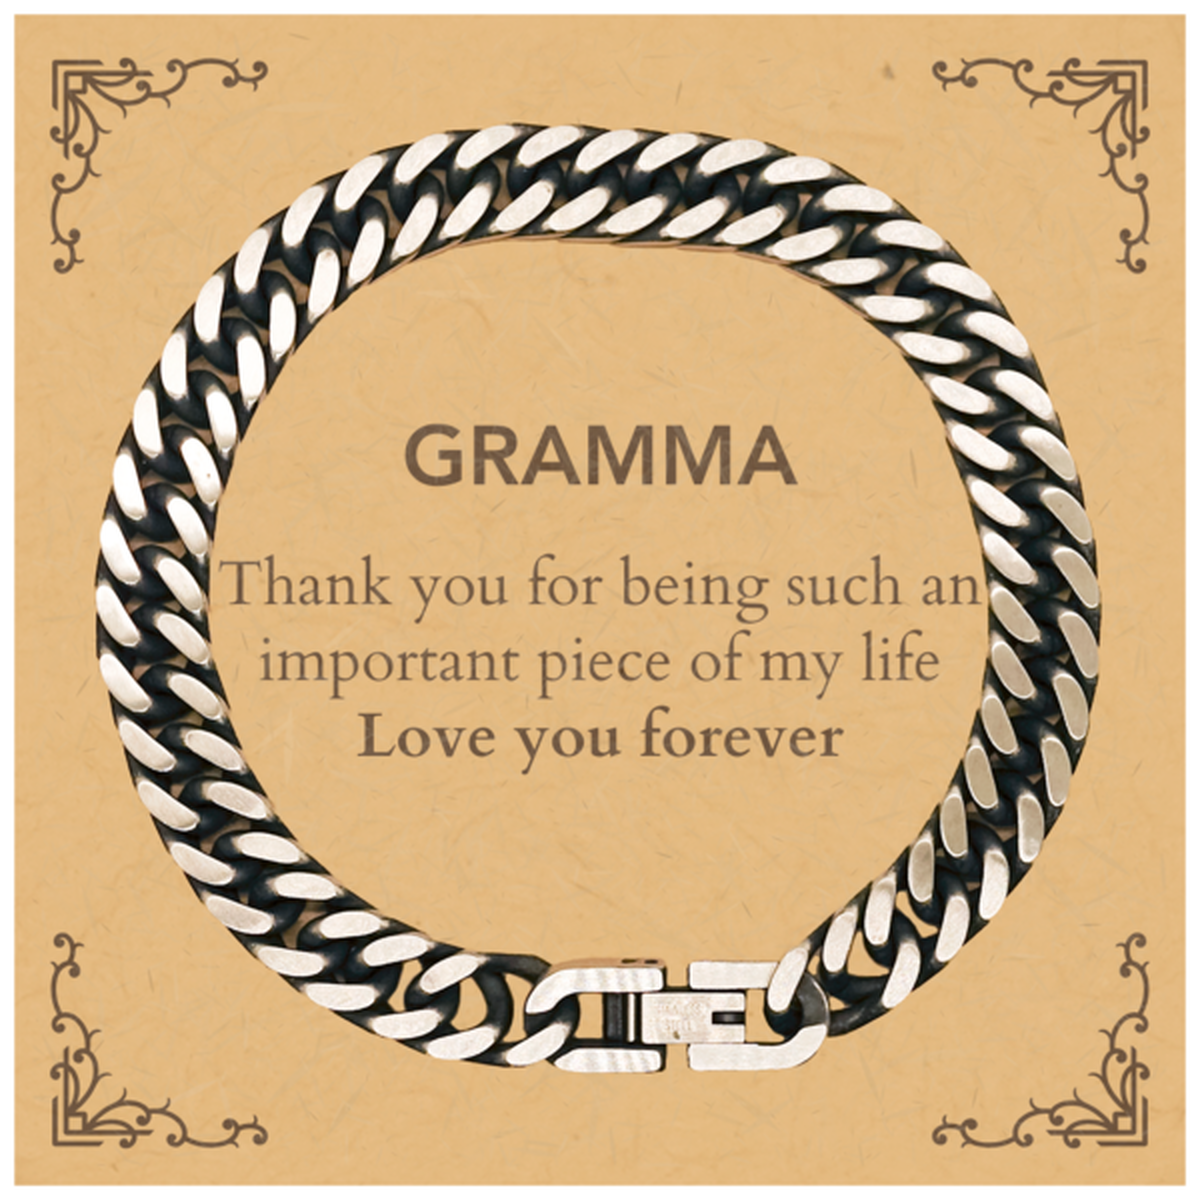 Appropriate Gramma Cuban Link Chain Bracelet Epic Birthday Gifts for Gramma Thank you for being such an important piece of my life Gramma Christmas Mothers Fathers Day